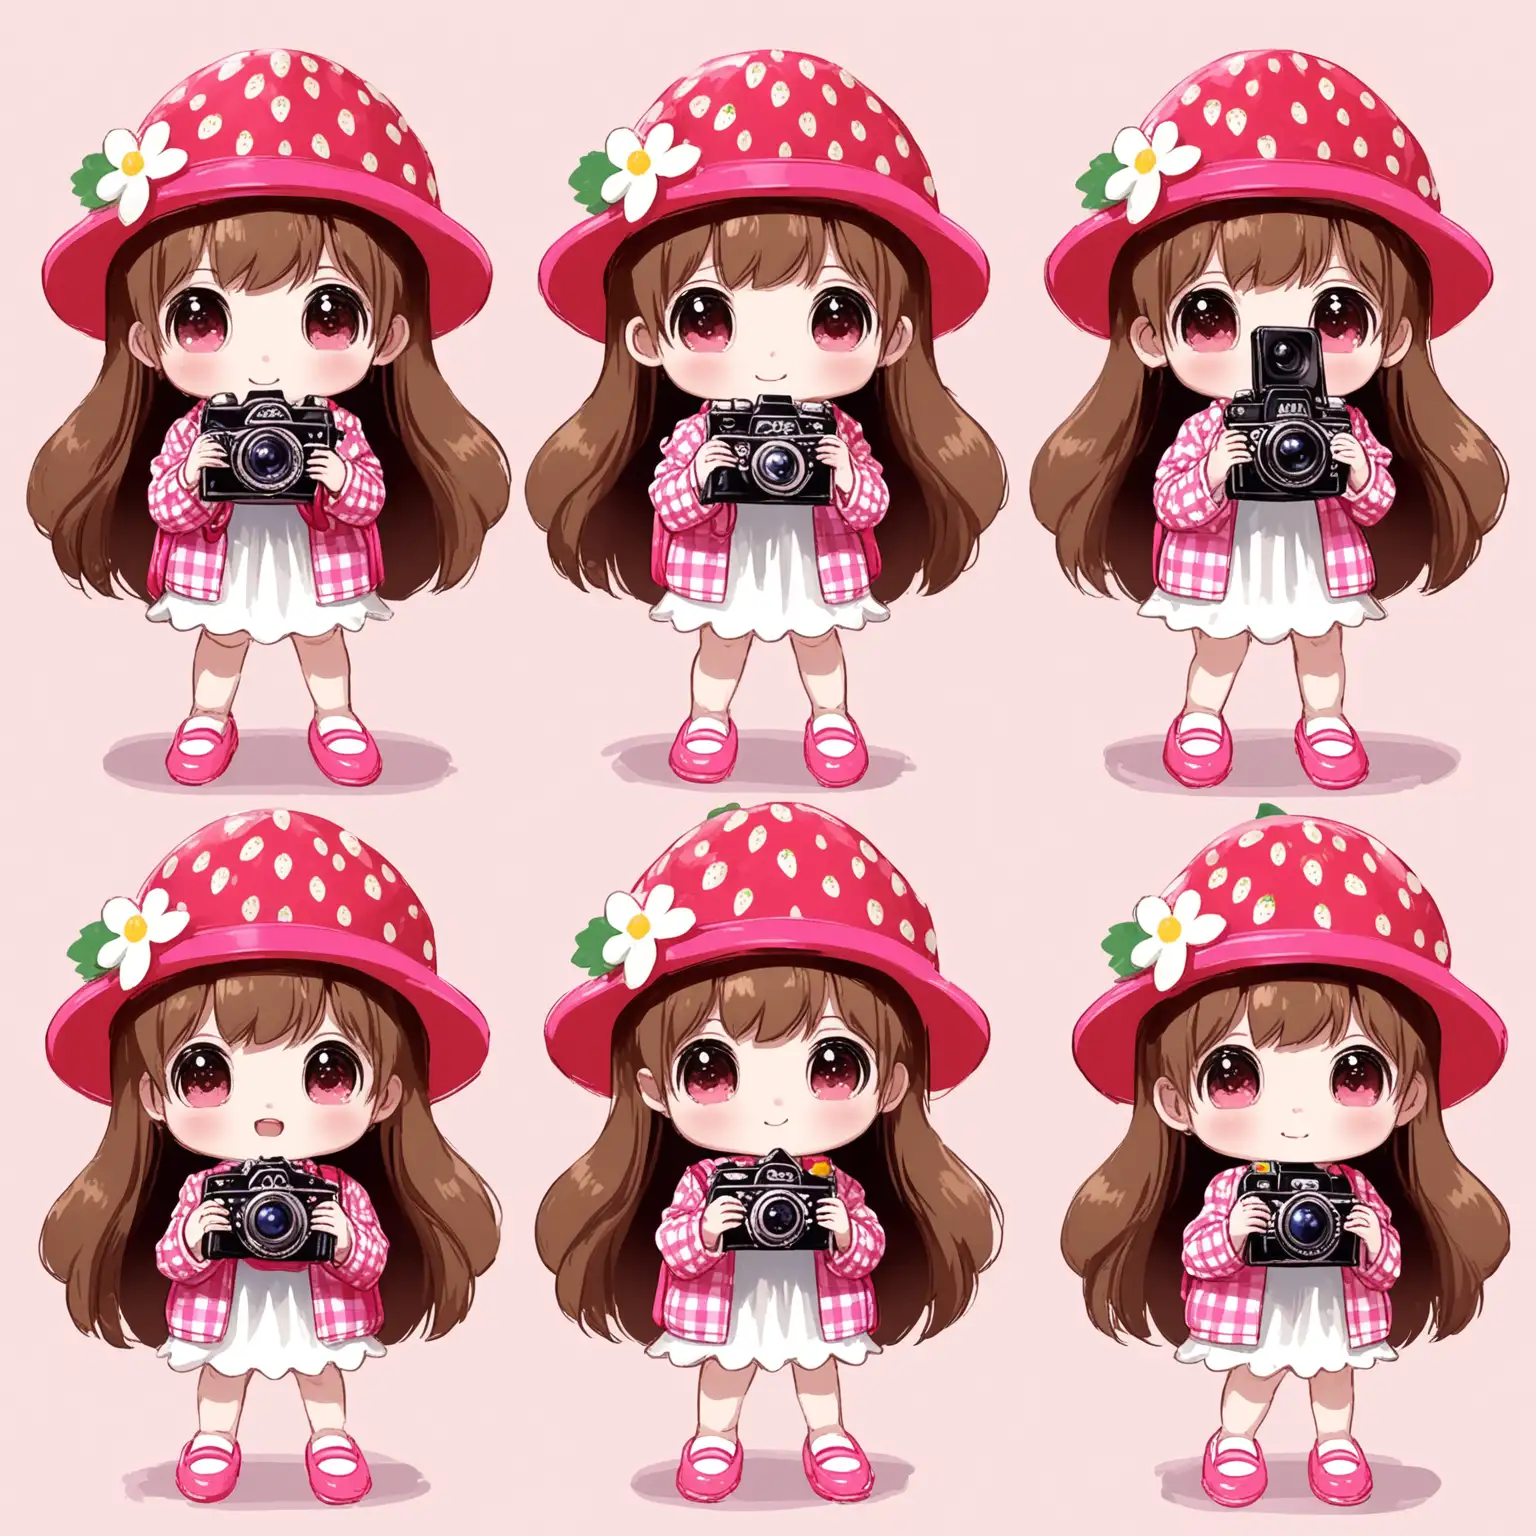 Q-Version-Small-Person-with-Strawberry-Hat-and-Pink-Outfit-Holding-a-Camera-in-a-Pink-Background